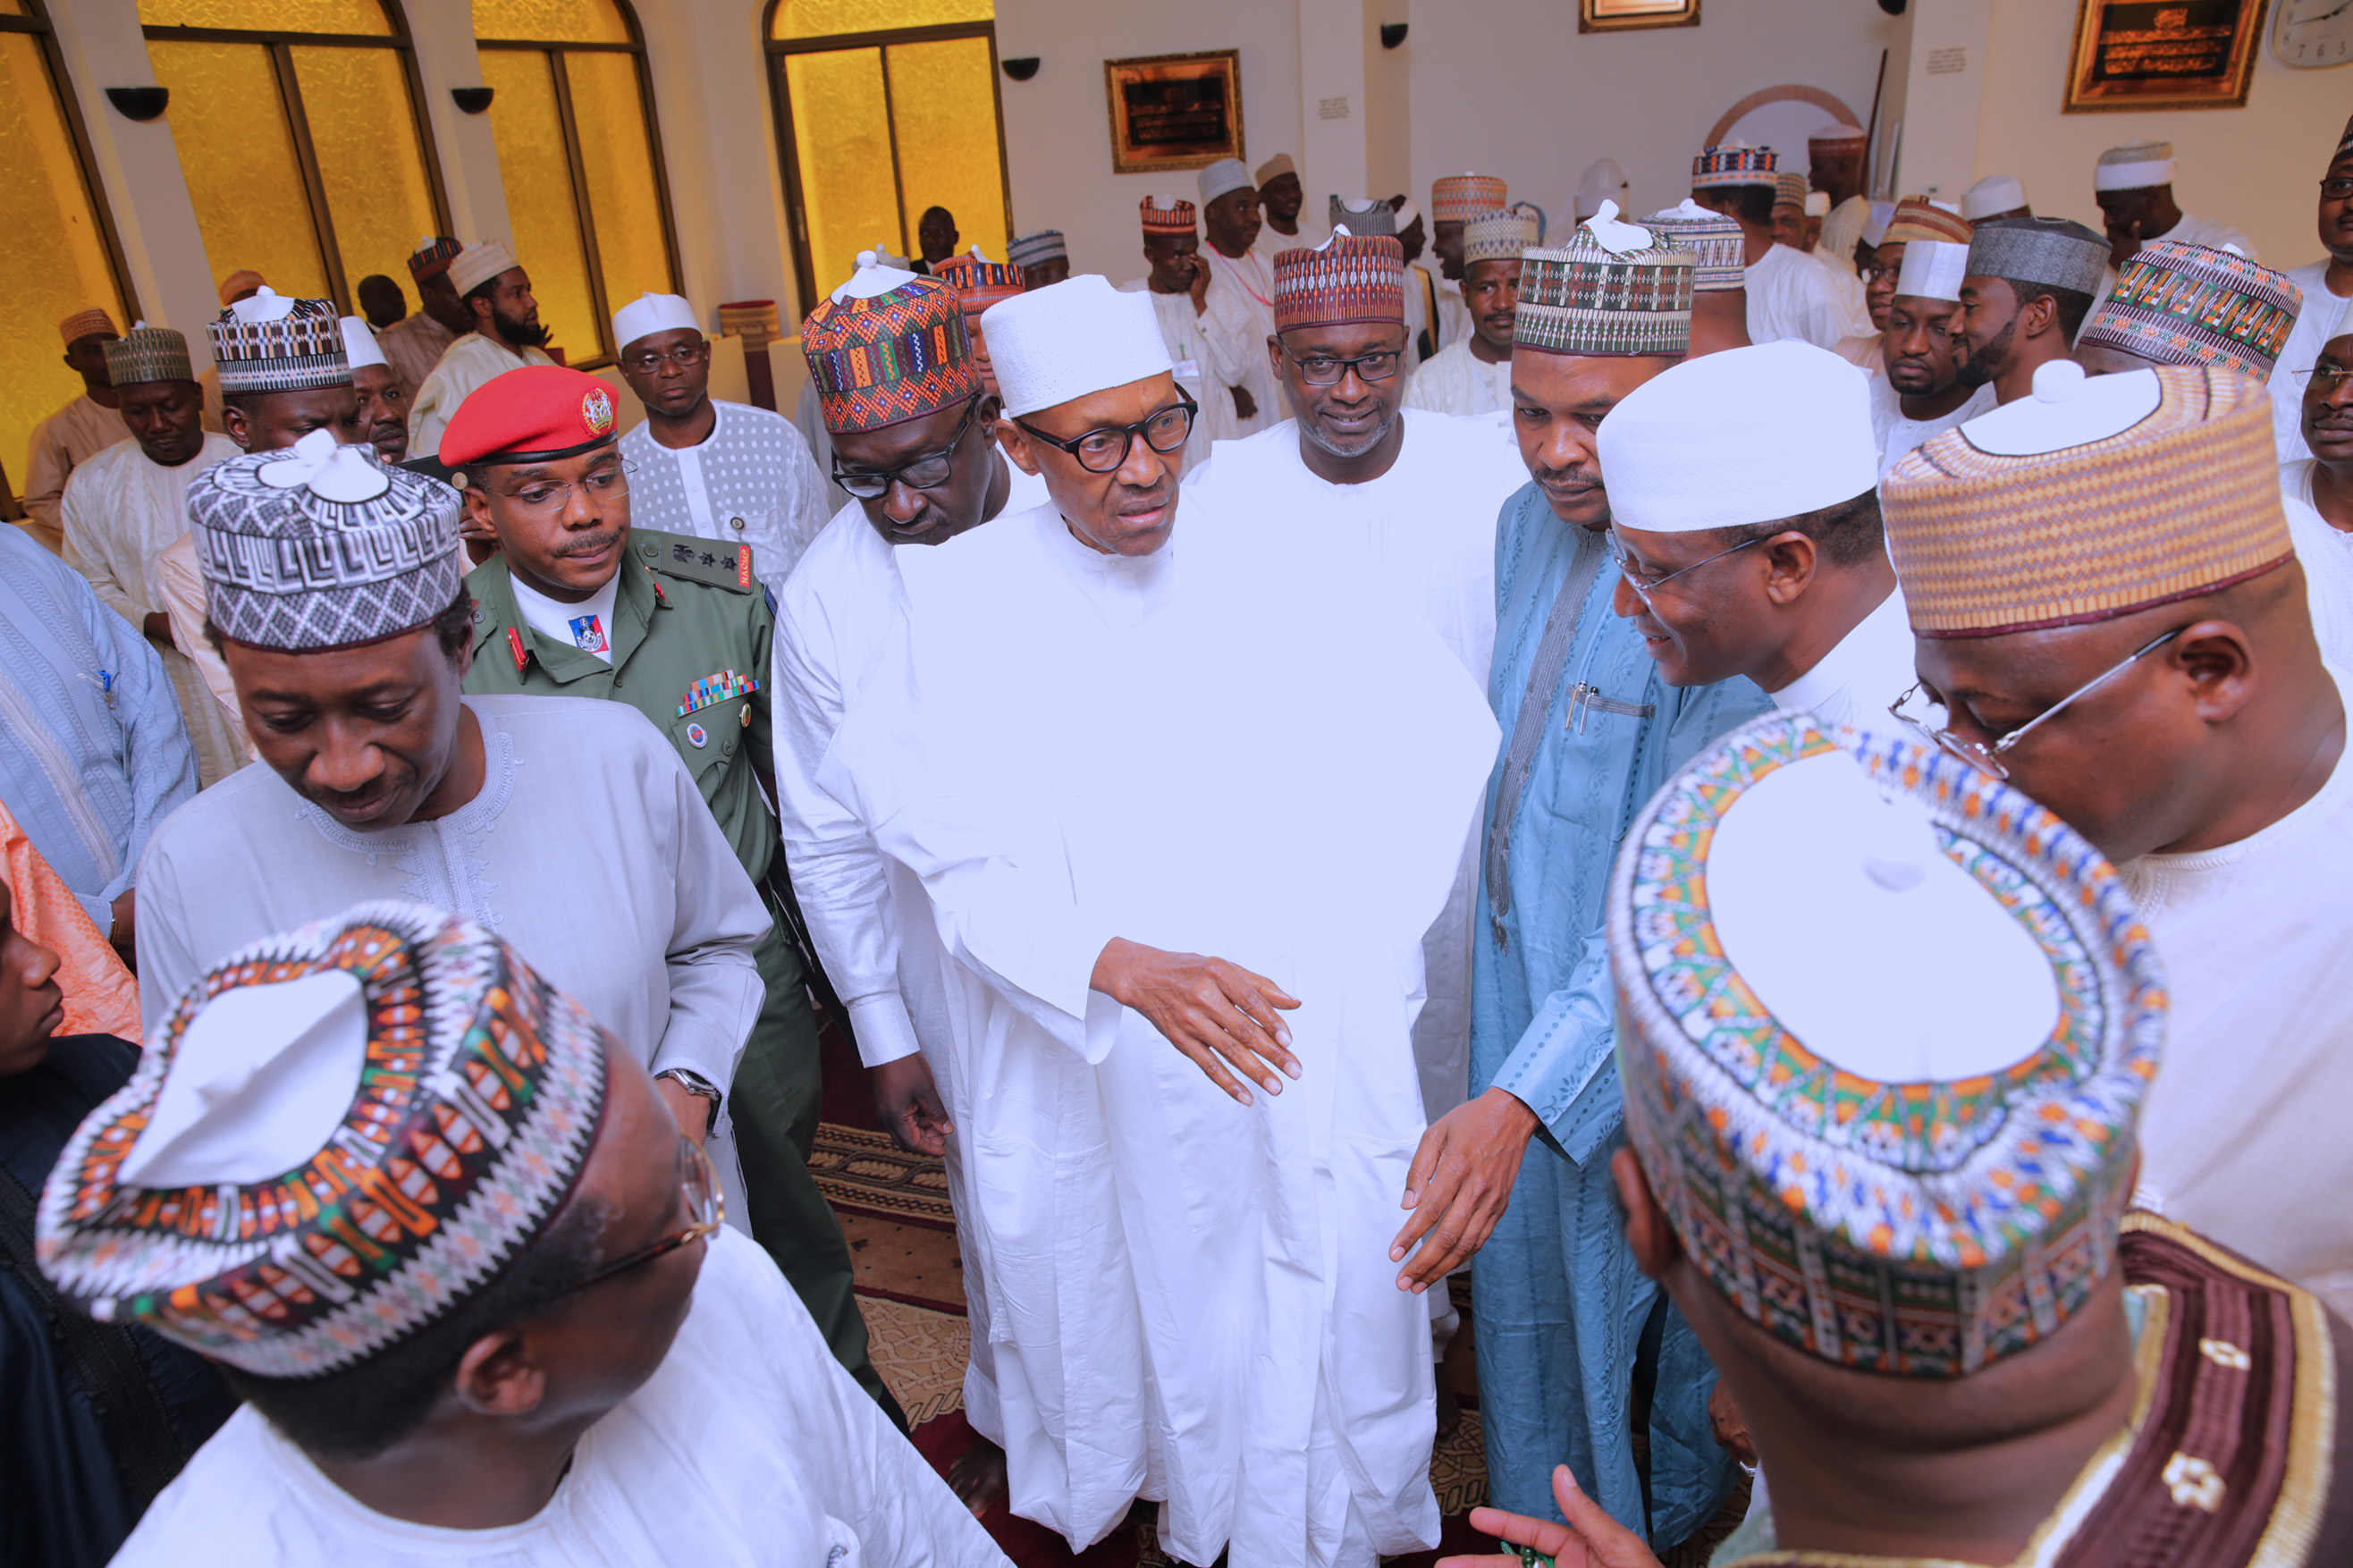 BREAKING: President Muhammadu Buhari Attends Friday Prayers At The State House Mosque